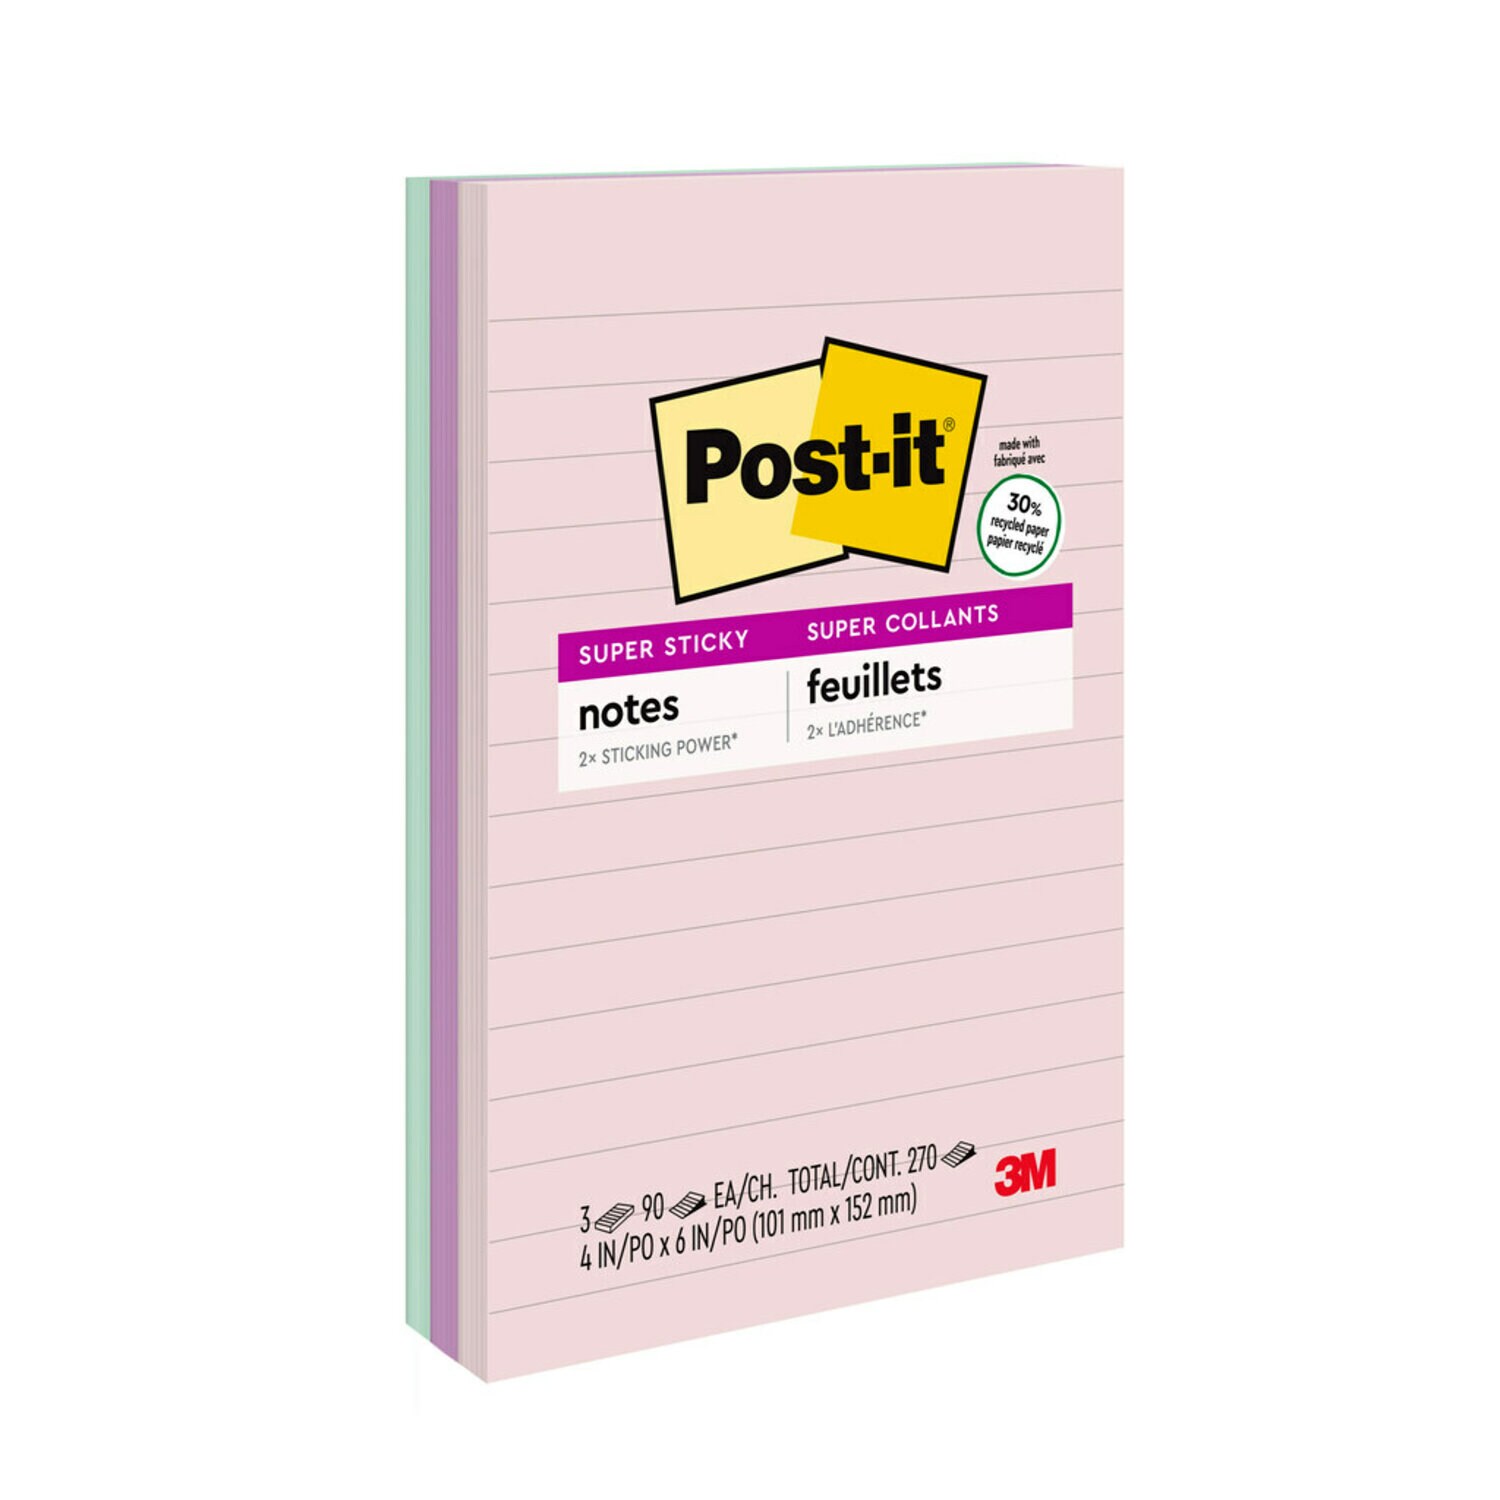 7100048299 - Post-it Super Sticky Recycled Notes 660-3SSNRP, 4 in x 6 in (101 mm x
152 mm) Bali Collection, Lined 5 Pads/Pack